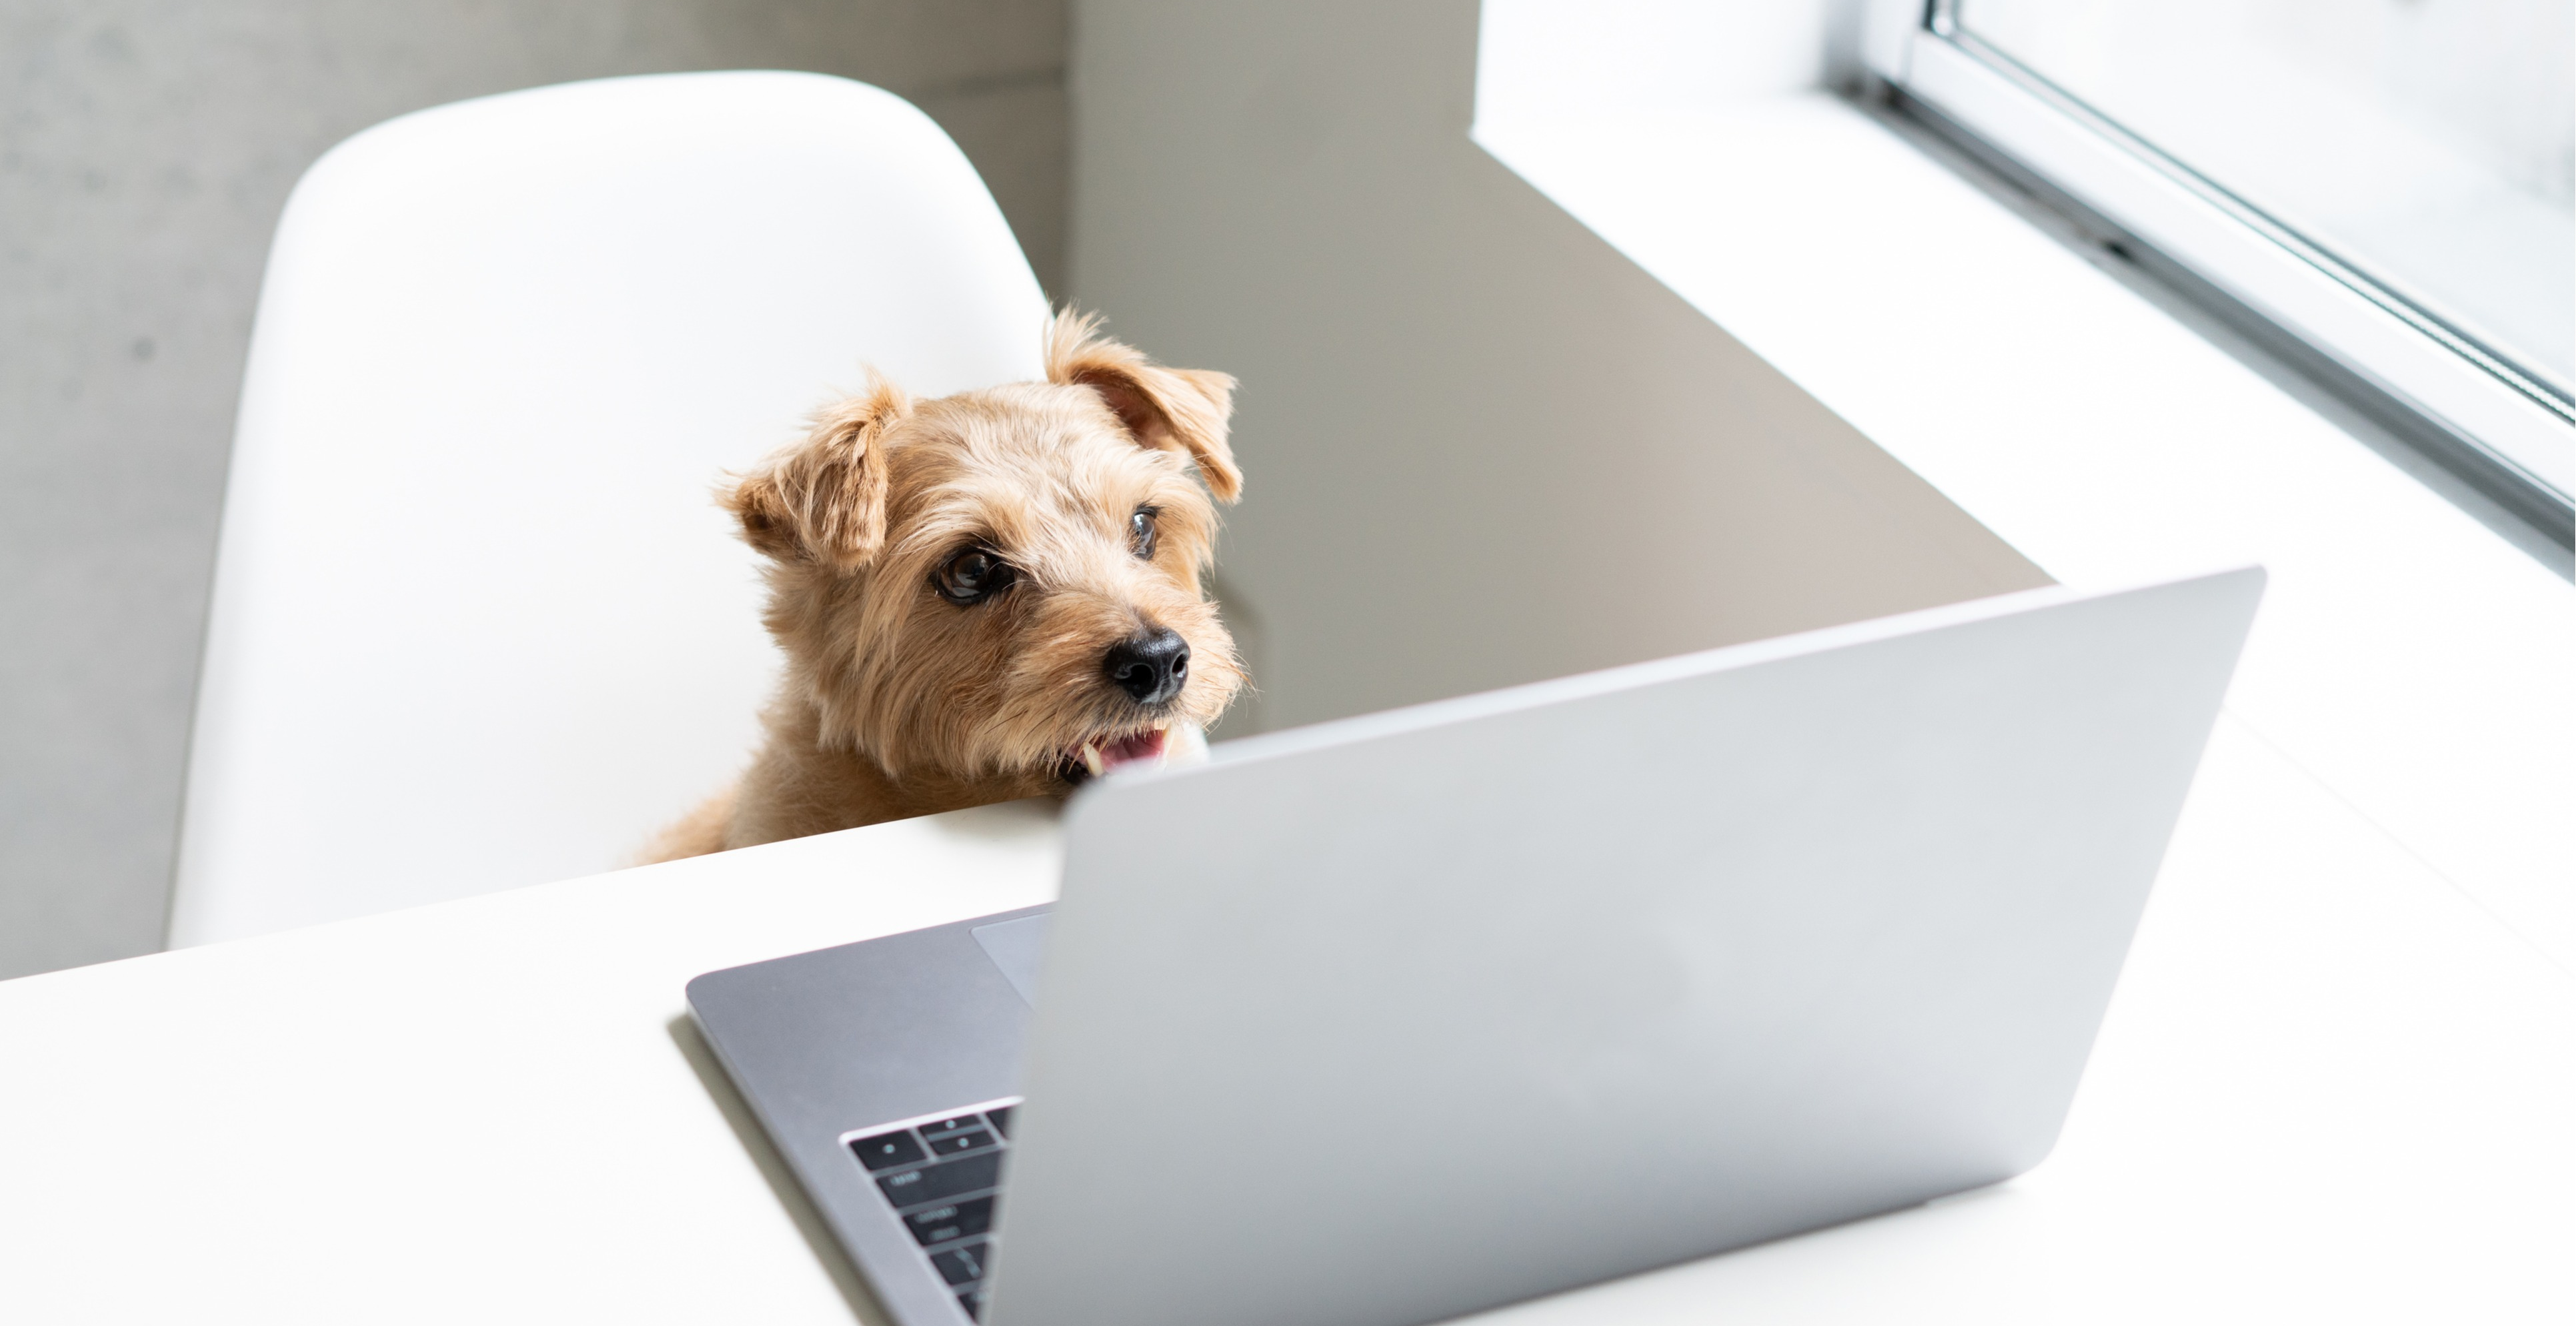 Should You Let Your Employees Take Their Pets to Work?